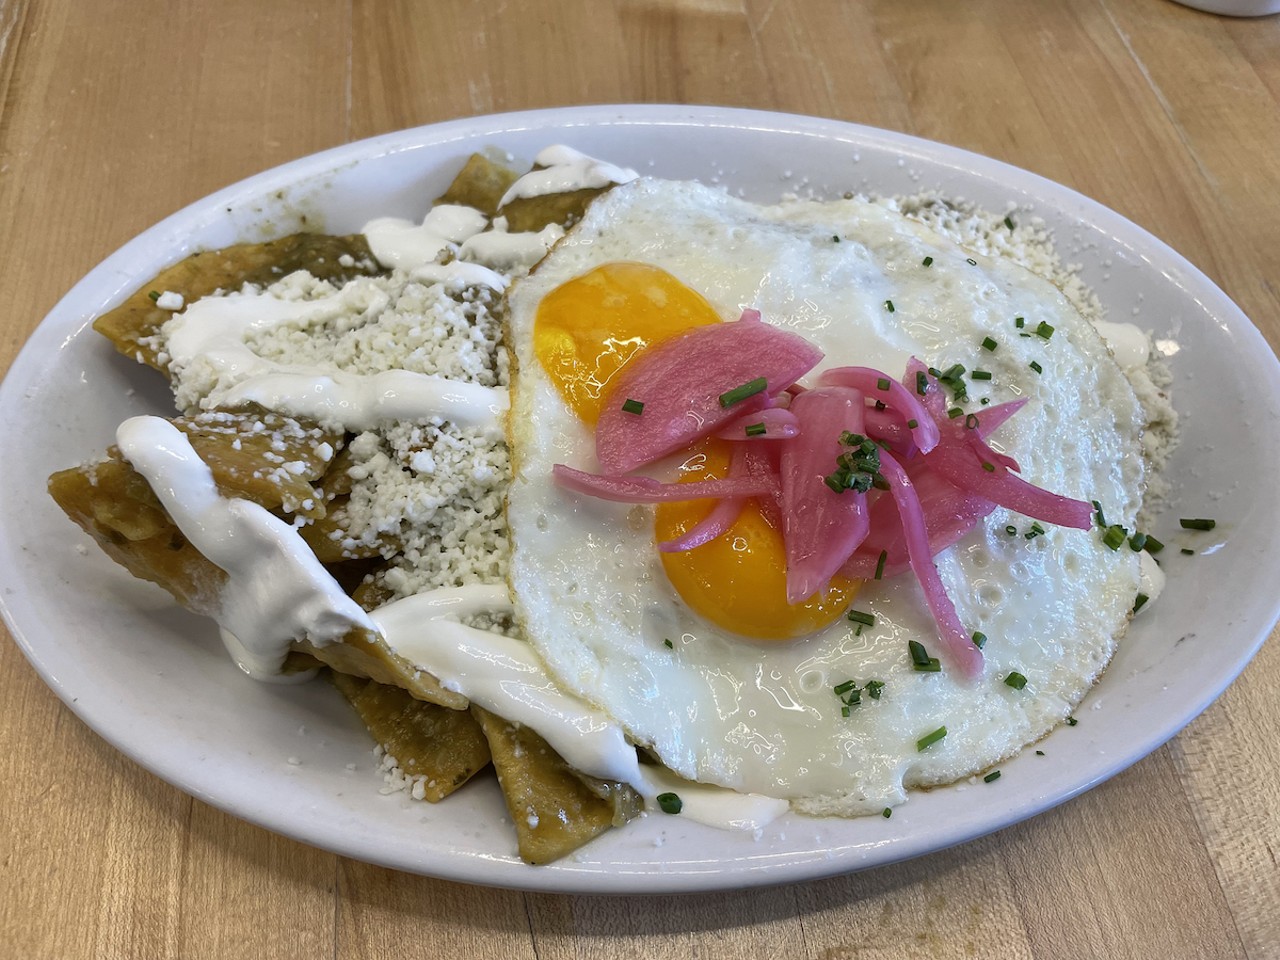 Con Huevos
2125 Hurstbourne Parkway, 10639 Meeting St., 2339 Frankfort Ave., 4938 US Highway 42, 210 W. Liberty St.
Review: Recommended: Con Huevos, A Louisville Favorite For Breakfast Or Lunch
Recommended: "I often get huevos rancheros ($13.99) here, but for a change of pace decided to fill up on a hearty ration of chilaquiles ($13.99, or $4 for a small side dish). This classic Mexican dish, according to tradition, traces its roots to the Aztecs. It comes in many regional variations, but Con Huevos&#146; version is typical: Corn tortillas are cut into quarters and cooked in a bath of spicy salsa verde until they soften. Then, this comfortable bed becomes a home for two bright sunny-side-up eggs; grated queso fresco cheese; stripes of tangy crema; crisp, pink pickled onions; and snipped chives. It&#146;s quite a hefty combination, and I have to stop and think about how best to eat it &#150; usually a mix of fork, knife, and fingers &#150; but all the disparate flavors come together in an appetizing mix.&#148;